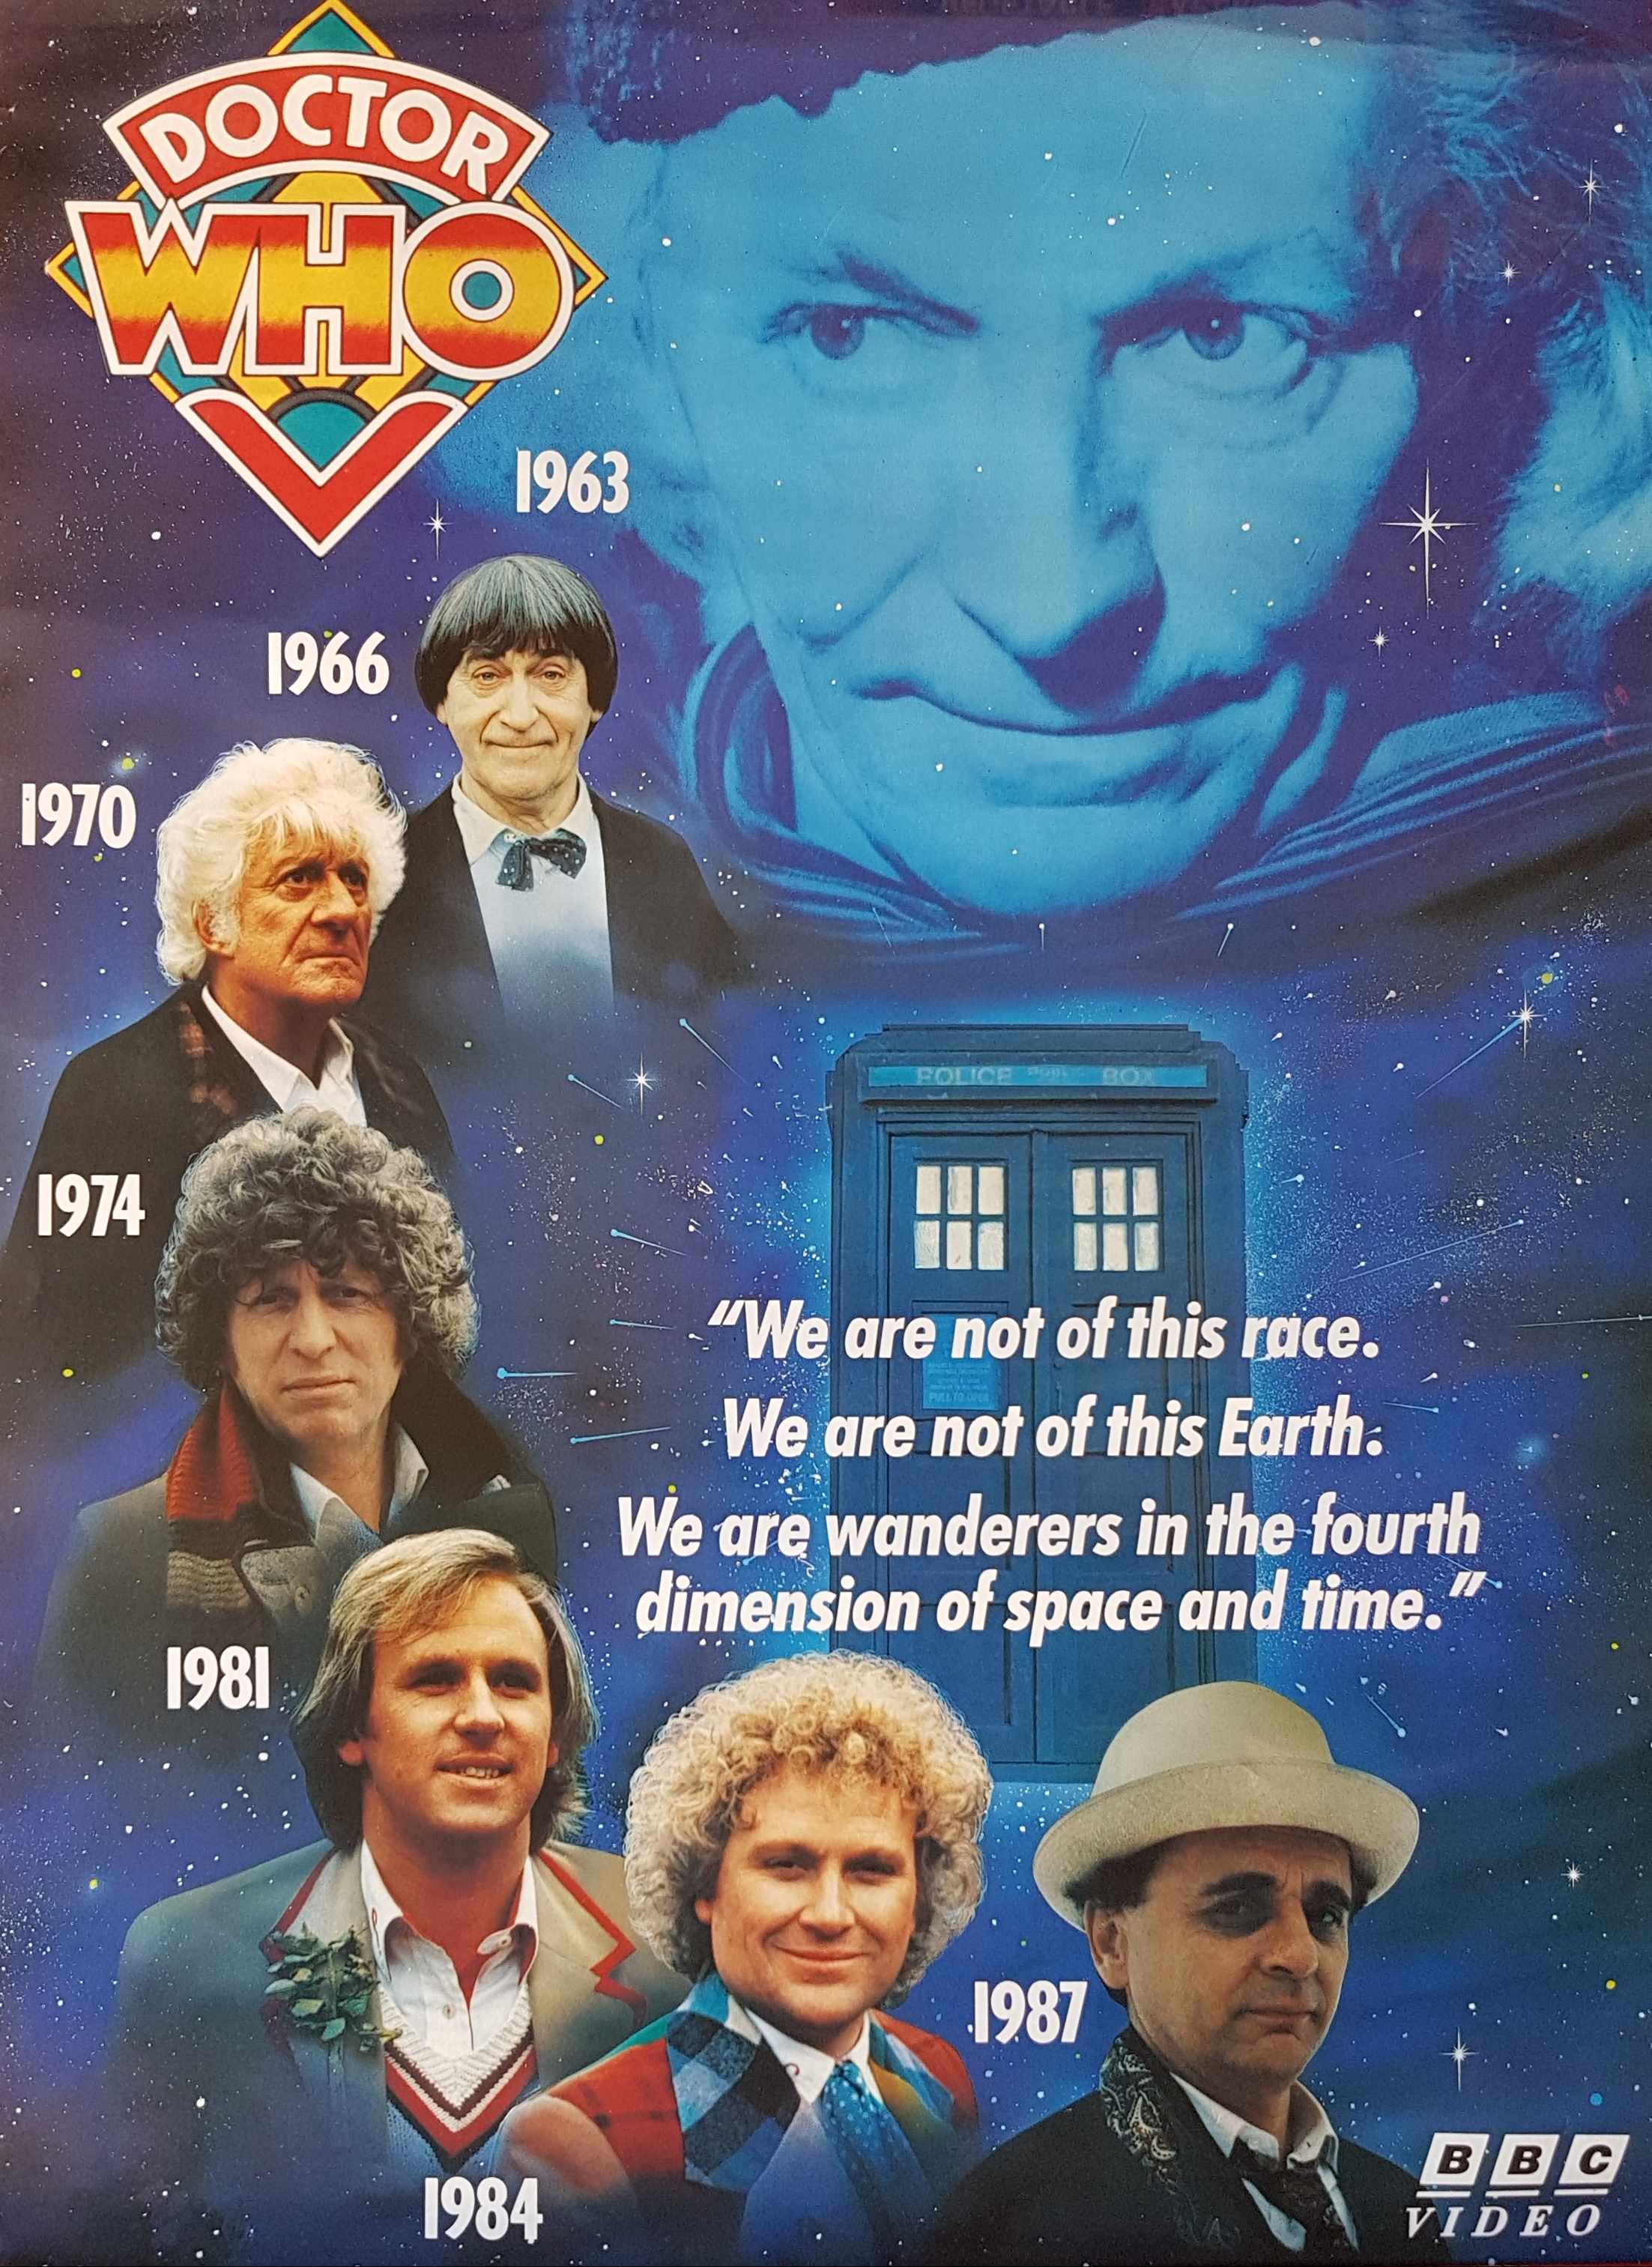 Picture of Doctor Who - 7 Doctors by artist Unknown from the BBC posters - Records and Tapes library